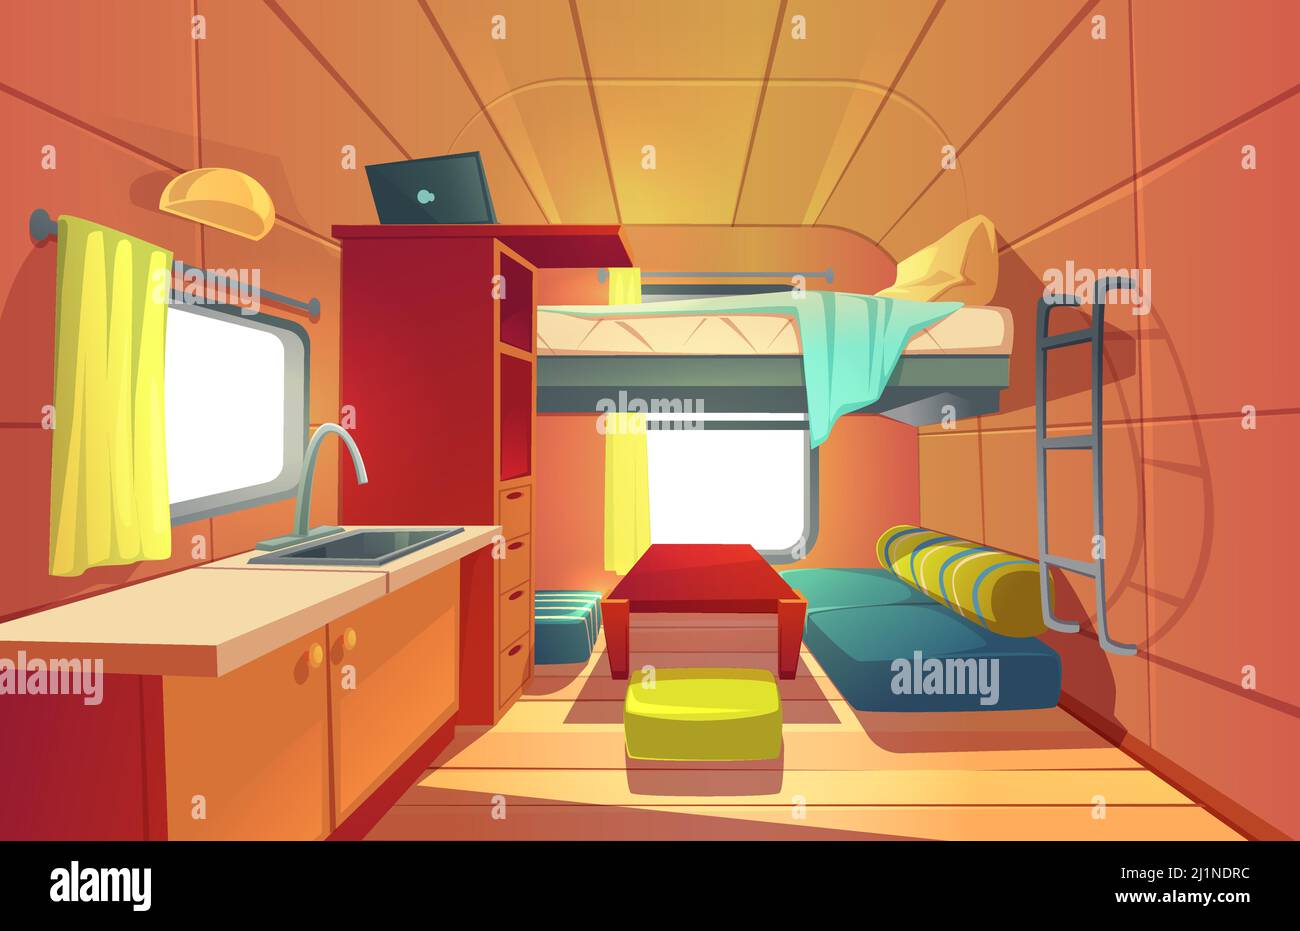 Camping trailer car interior with loft bed, couch, kitchen sink, desk with laptop, bookshelf and window. Rv motor home room inside view, cozy place fo Stock Vector